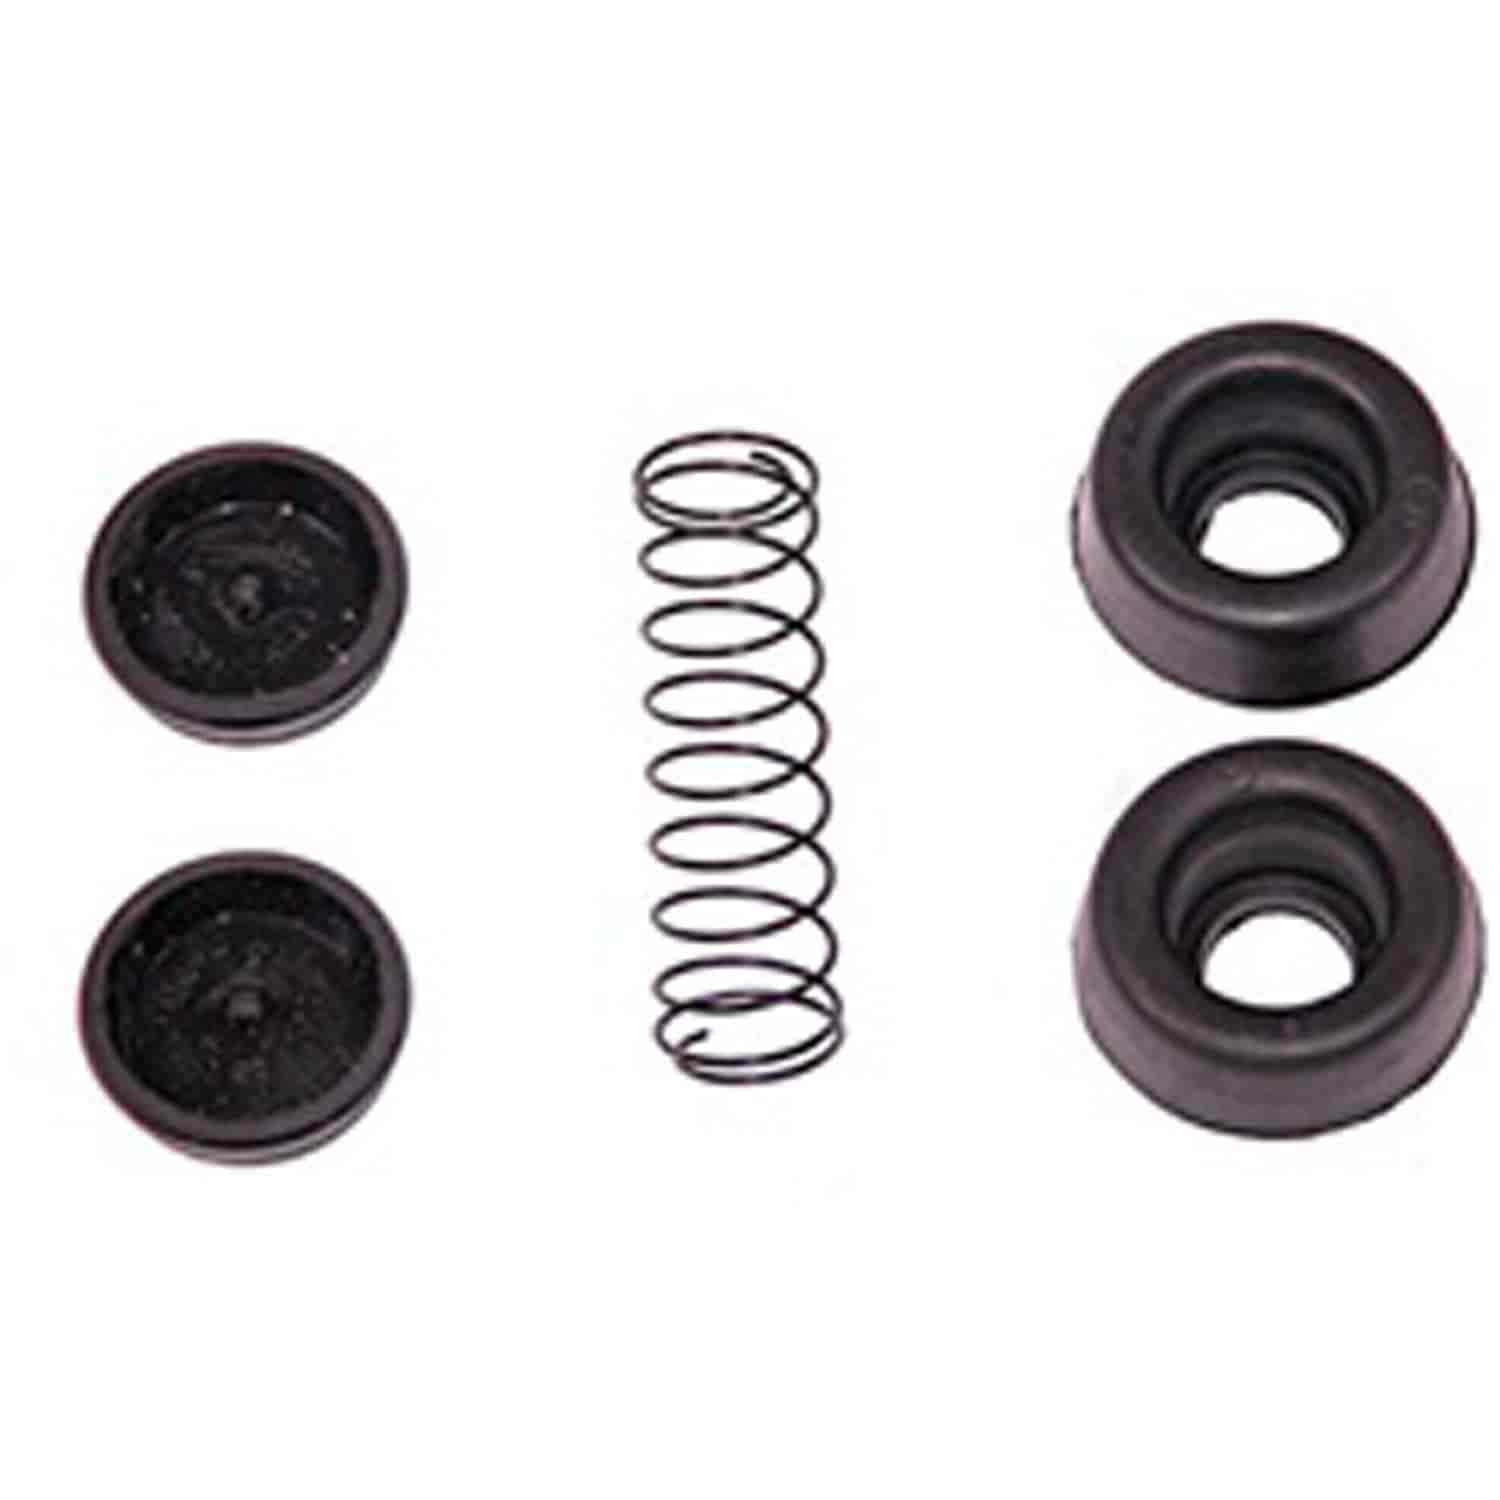 This wheel cylinder repair kit from Omix-ADA allows you to rebuild wheel cylinders with a 1-1/8 inch bore.